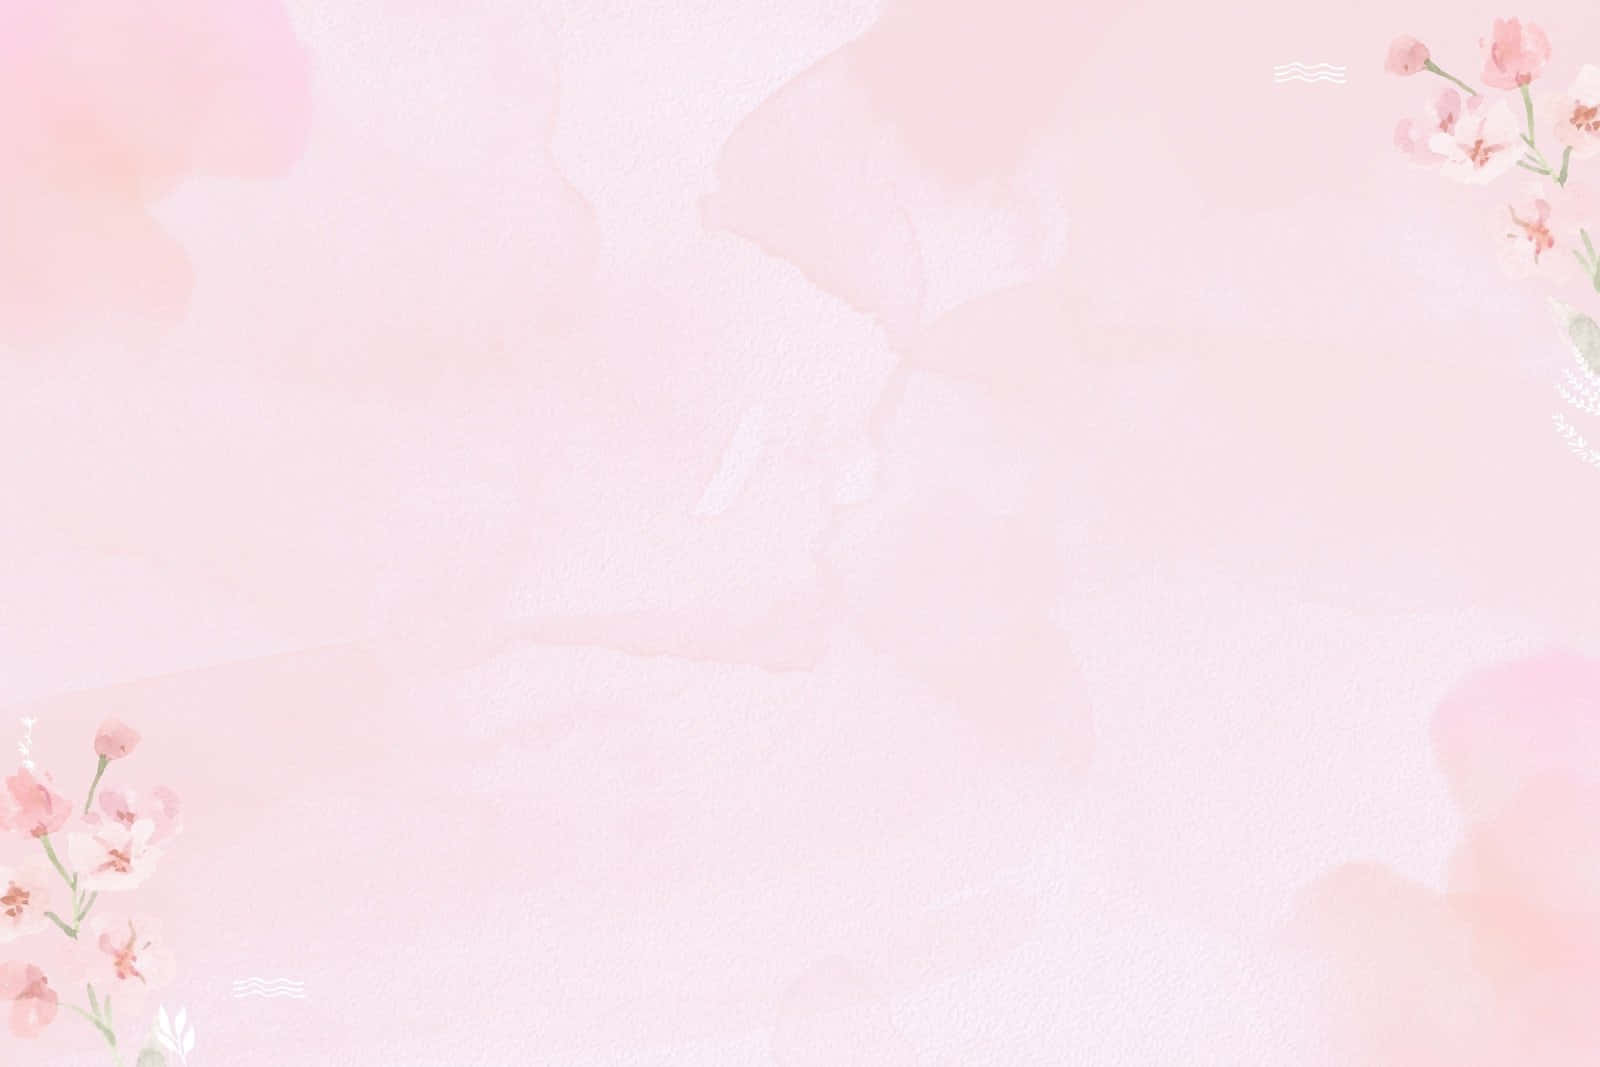 200+] Pink Flowers Aesthetic Backgrounds